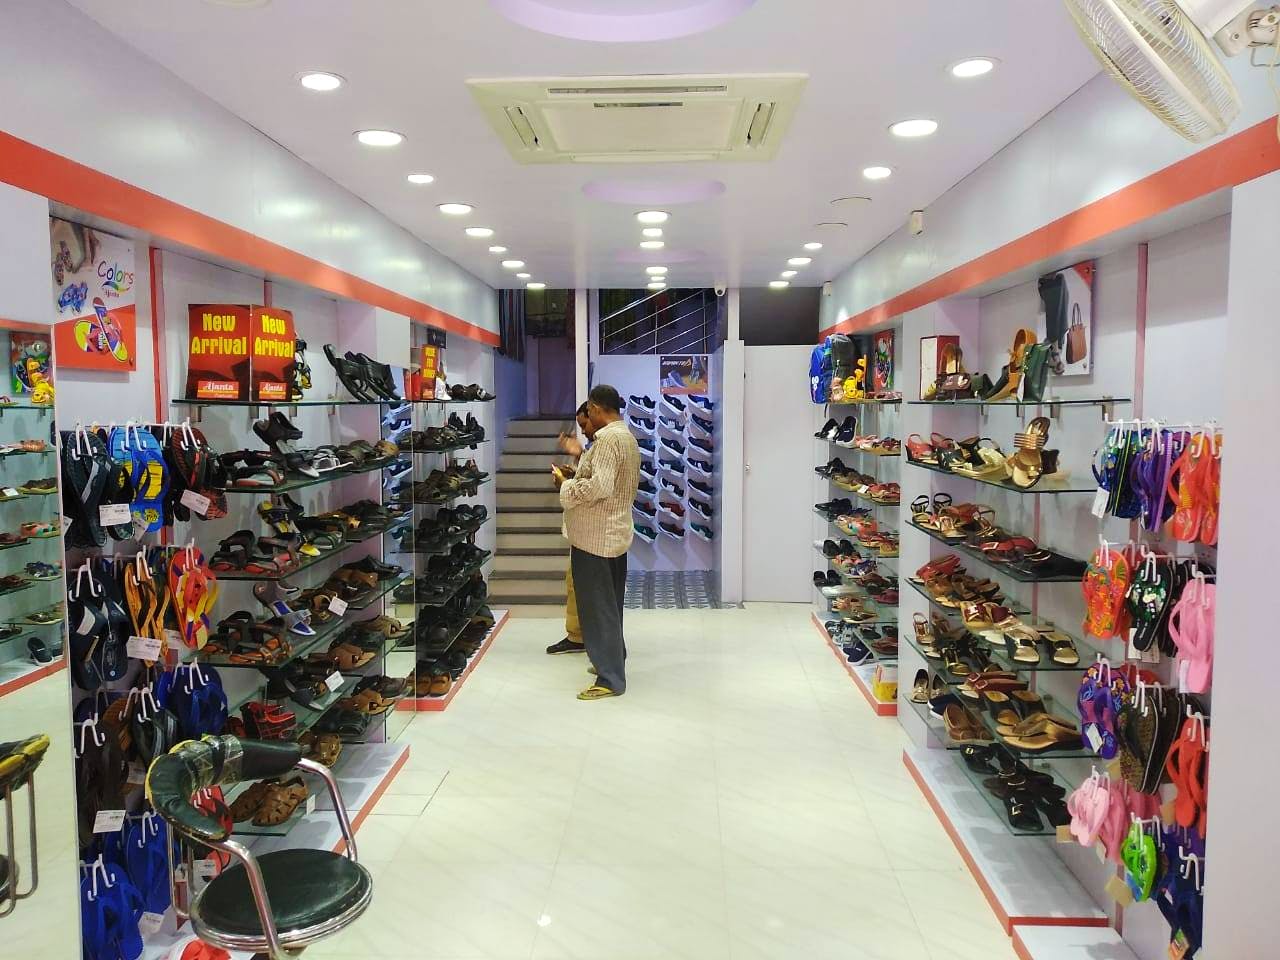 Product,Outlet store,Footwear,Retail,Building,Shoe store,Eyewear,Shoe,Athletic shoe,Shopping mall